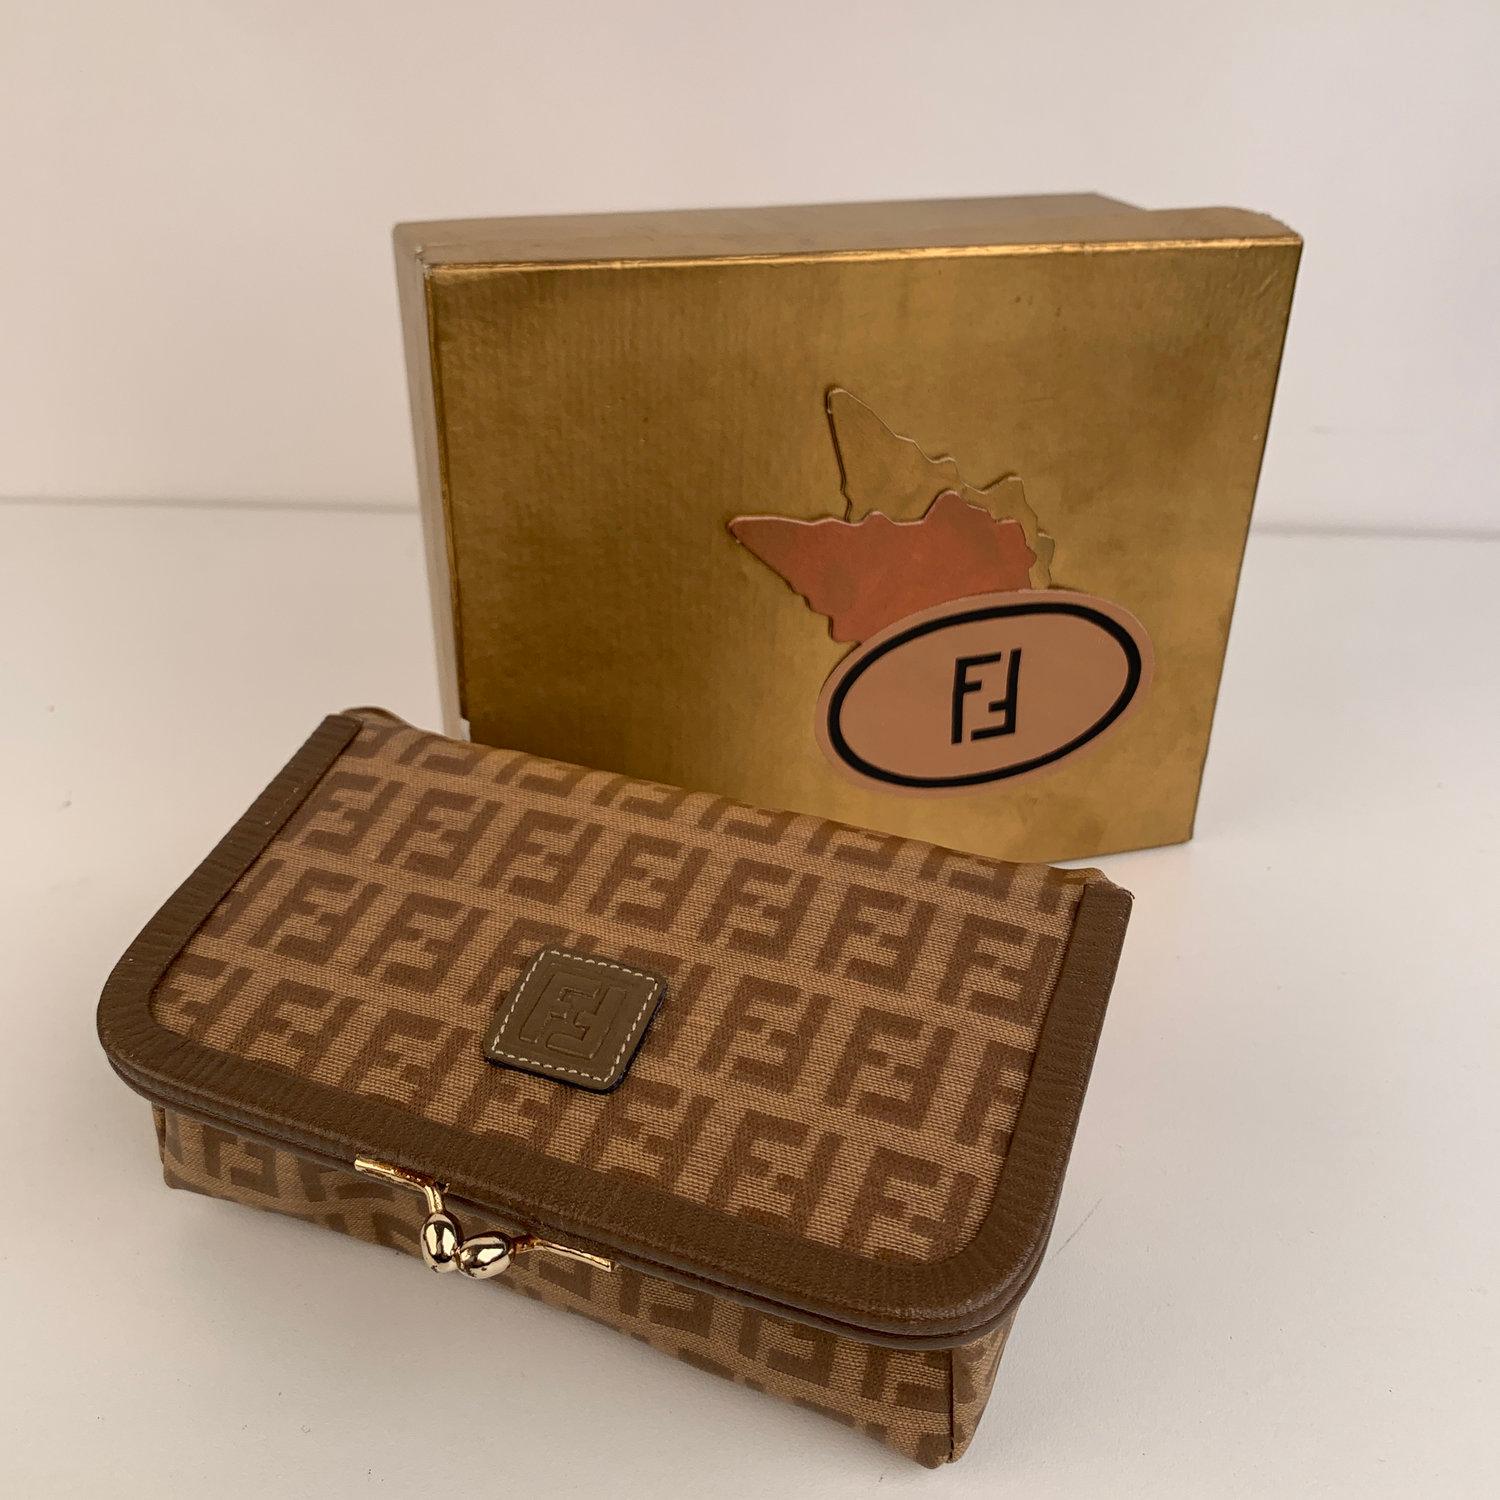 Beautiful vintage Fendi cosmetic case, crafted in tan FF monograms vinyl canvas with genuine leather trim. Kiss lock closure and mirror inside. It can be used also as a travel jewelry case. FF - FENDI logo patch on the lid. 'Fendi s.a.s Roma - made